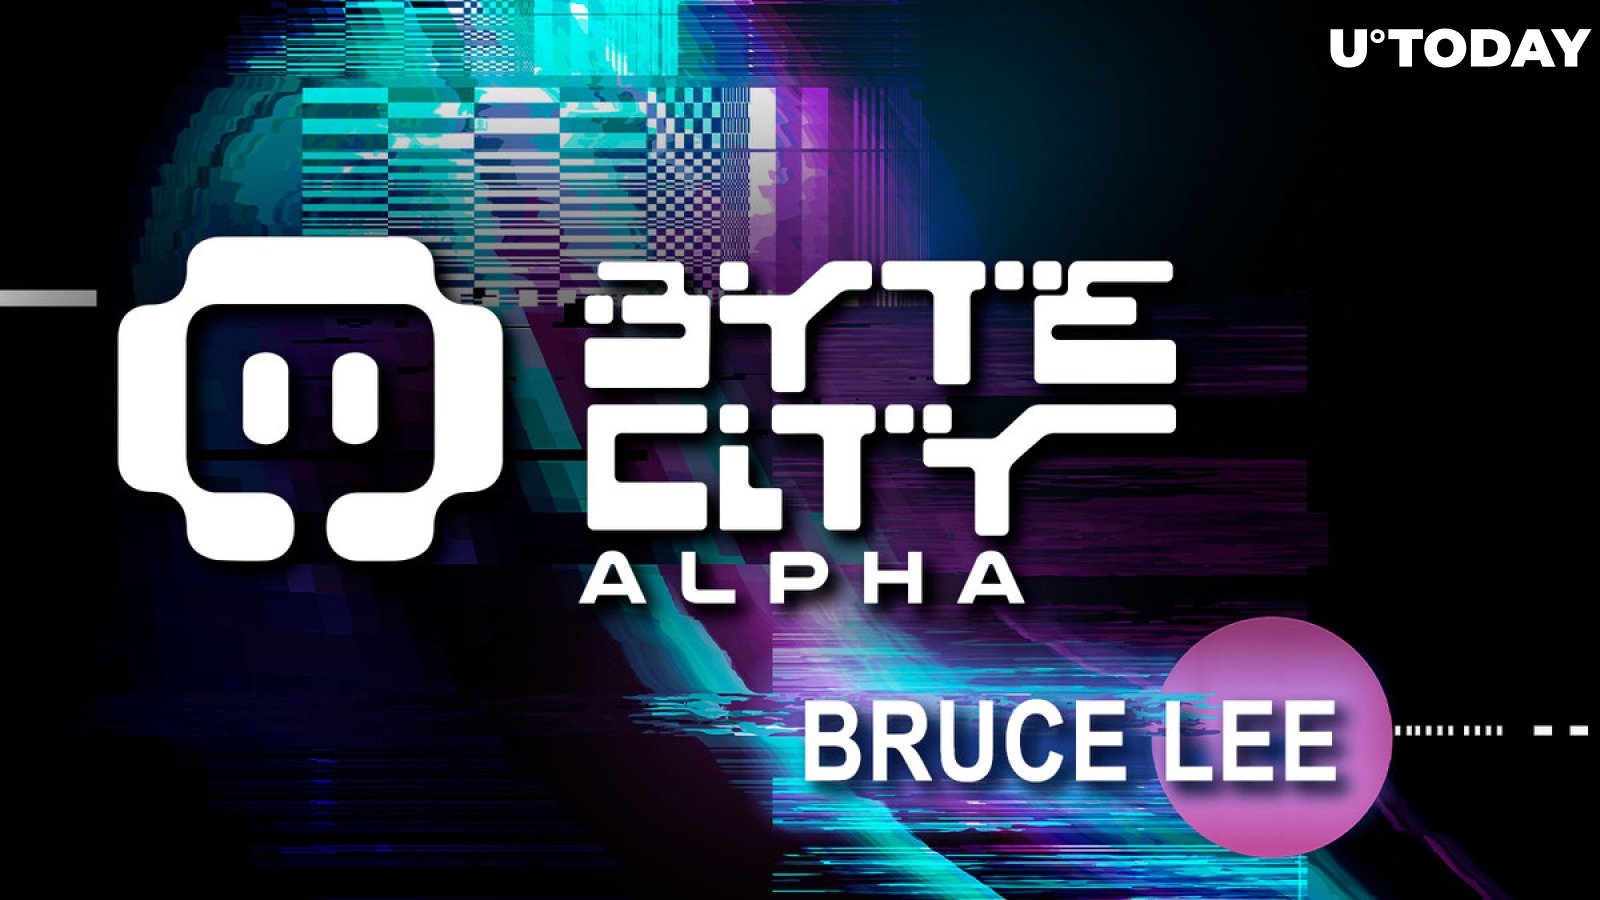 Bruce Lee Immortalized in BYTE CITY Metaverse: Unique Digital Experience